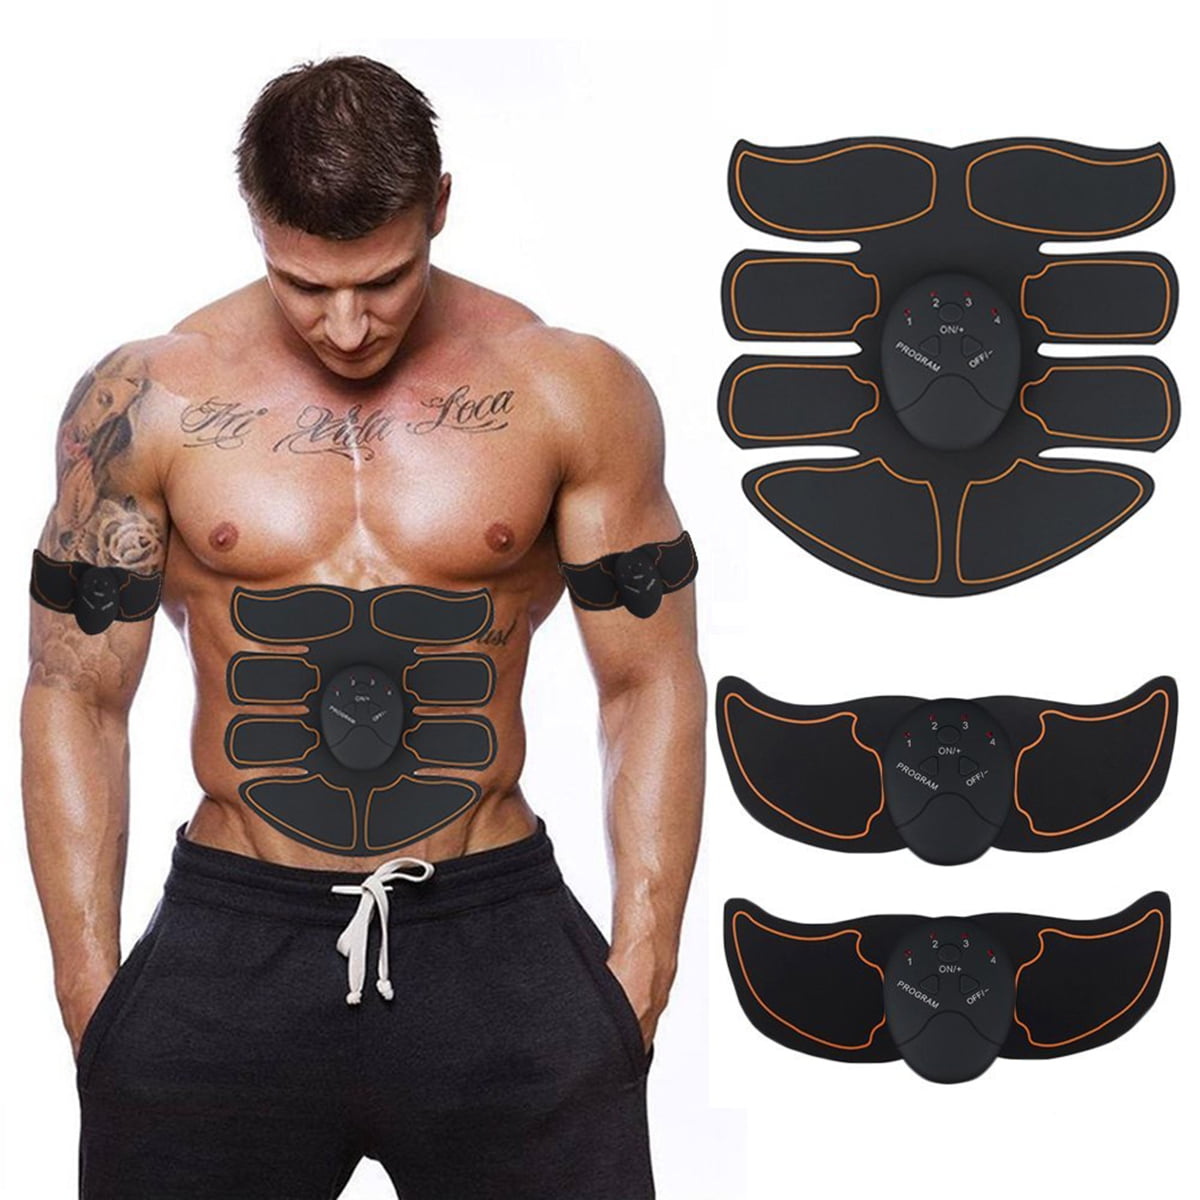 EMS Muscle Training Pad Gear ABS Trainer Fit Body Home Exercise Fitness US